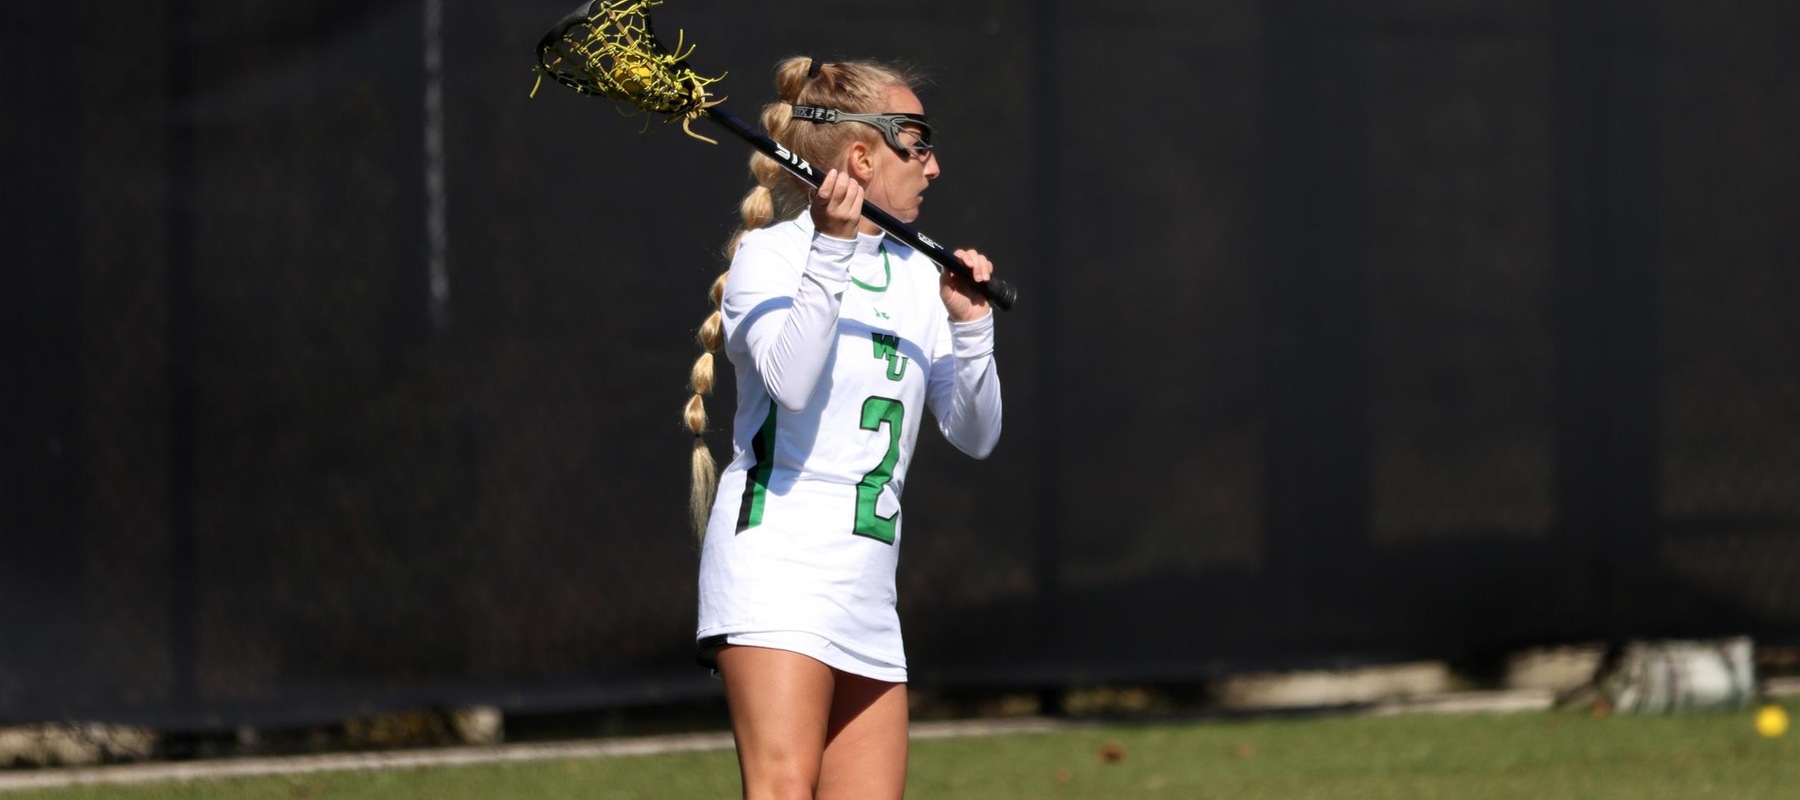 File photo of Taylor Lambeth who led the team with seven points (three goals and four assists) at Southern Wesleyan. Copyright 2022; Wilmington University. All rights reserved. Photo by Mitchell Coll. February 26, 2022.